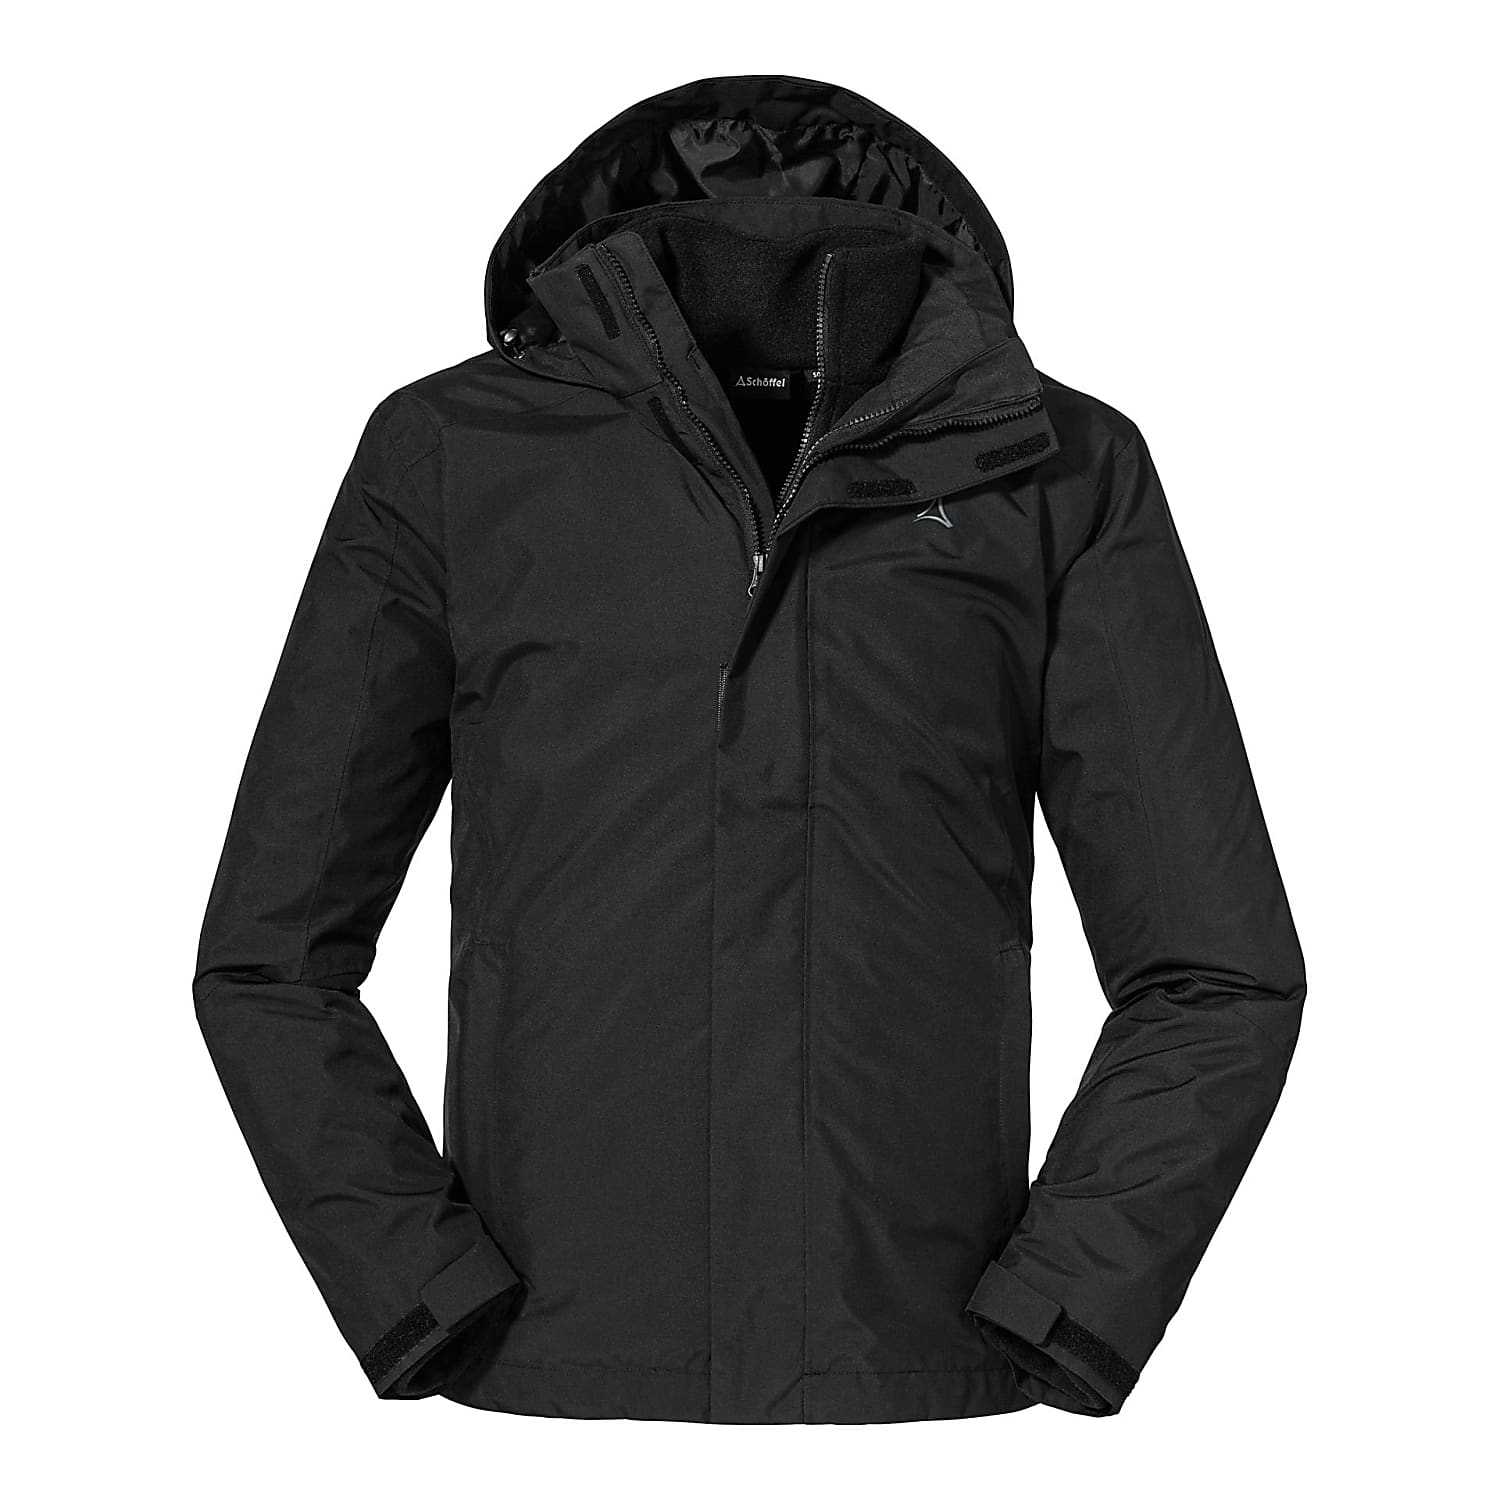 M 3IN1 Black - PARTINELLO, Fast shipping Schoeffel JACKET cheap and